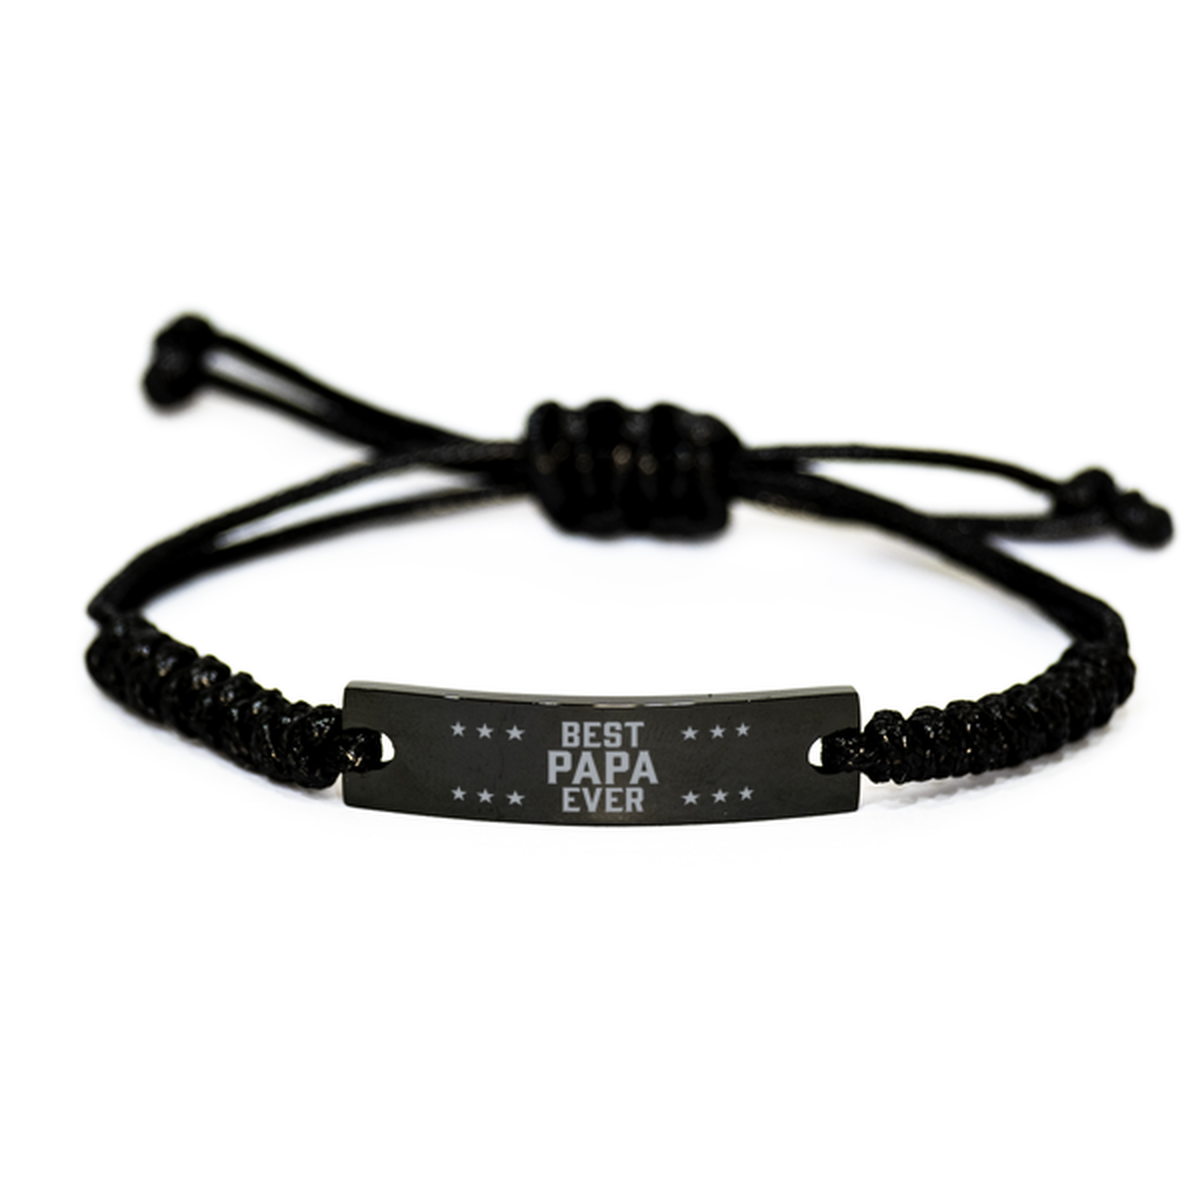 Best Papa Ever Papa Gifts, Funny Engraved Rope Bracelet For Papa, Birthday Family Gifts For Men